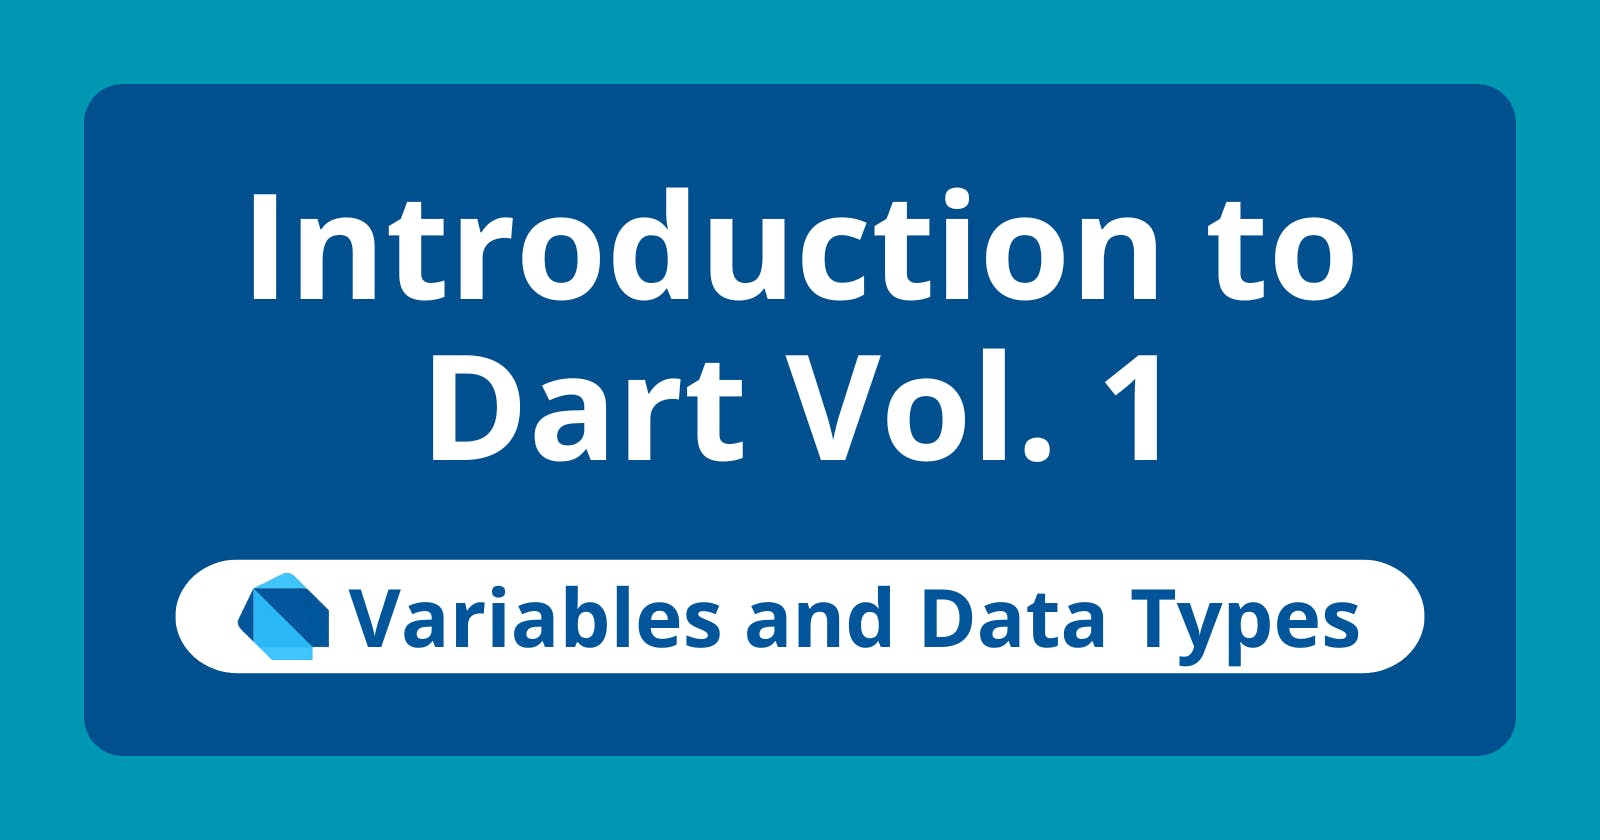 Introduction to Dart Vol. 1: Variables and Data Types